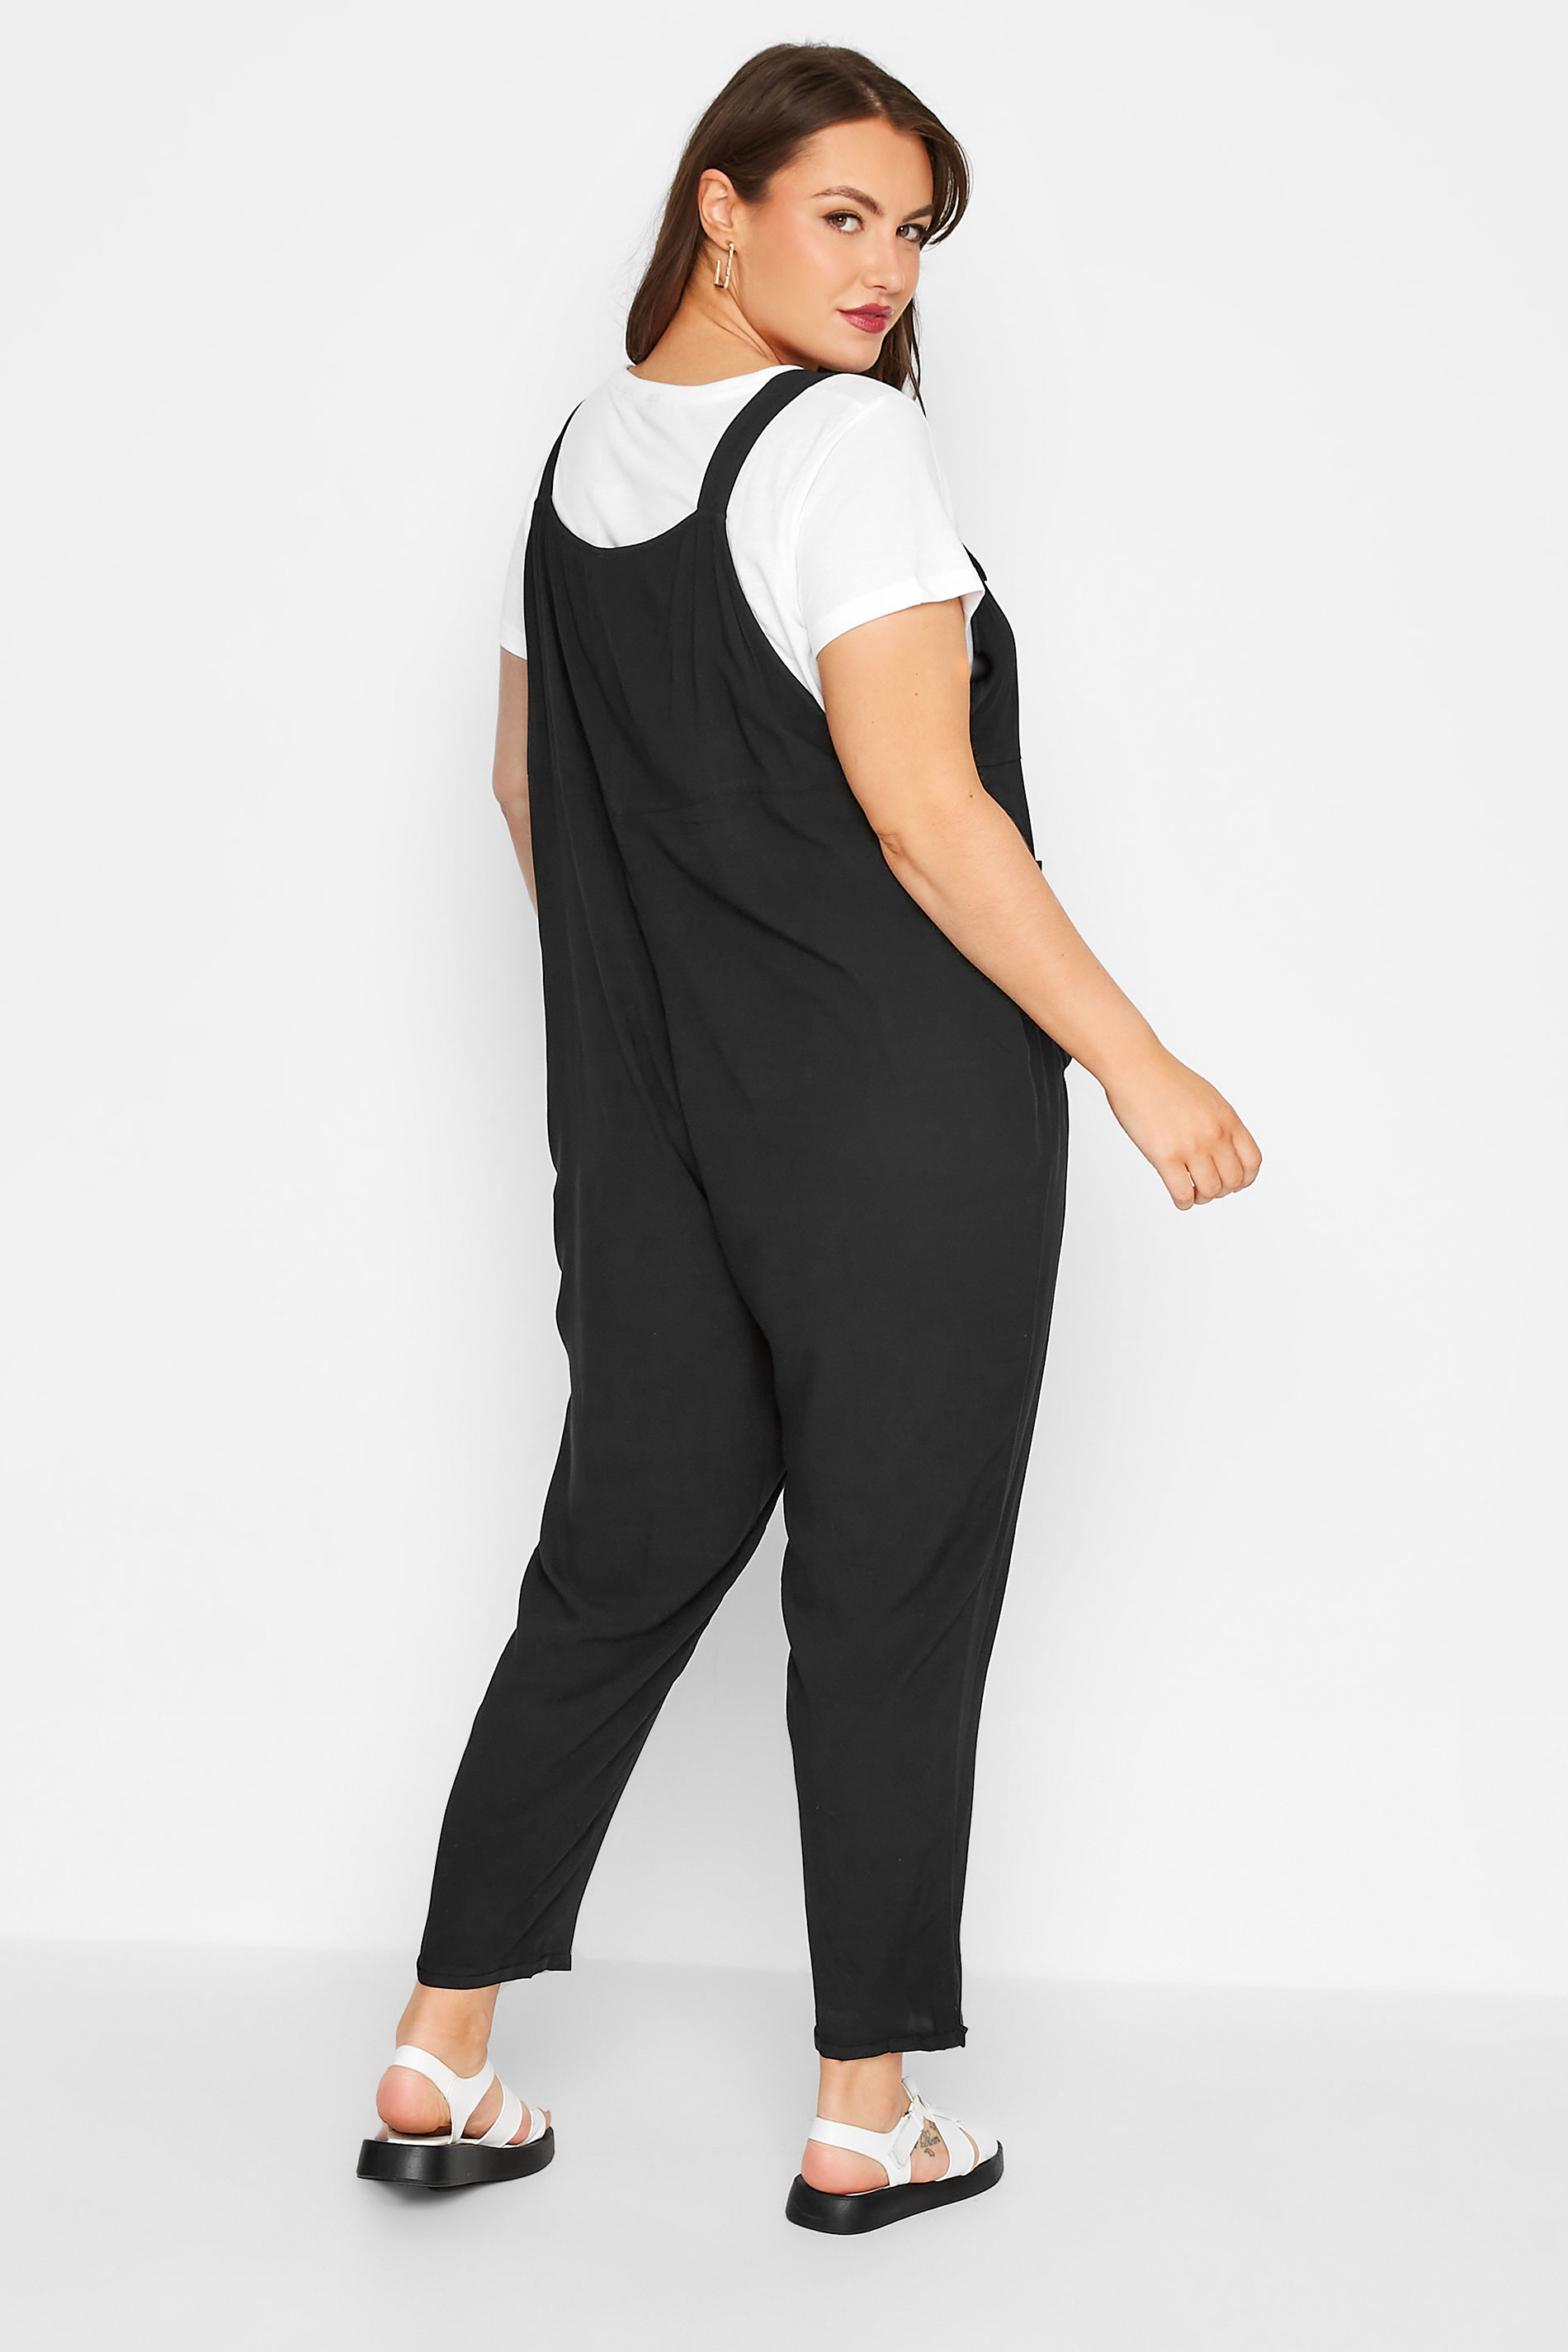 LIMITED COLLECTION Plus Size Black Pocket Dungarees | Yours Clothing 3